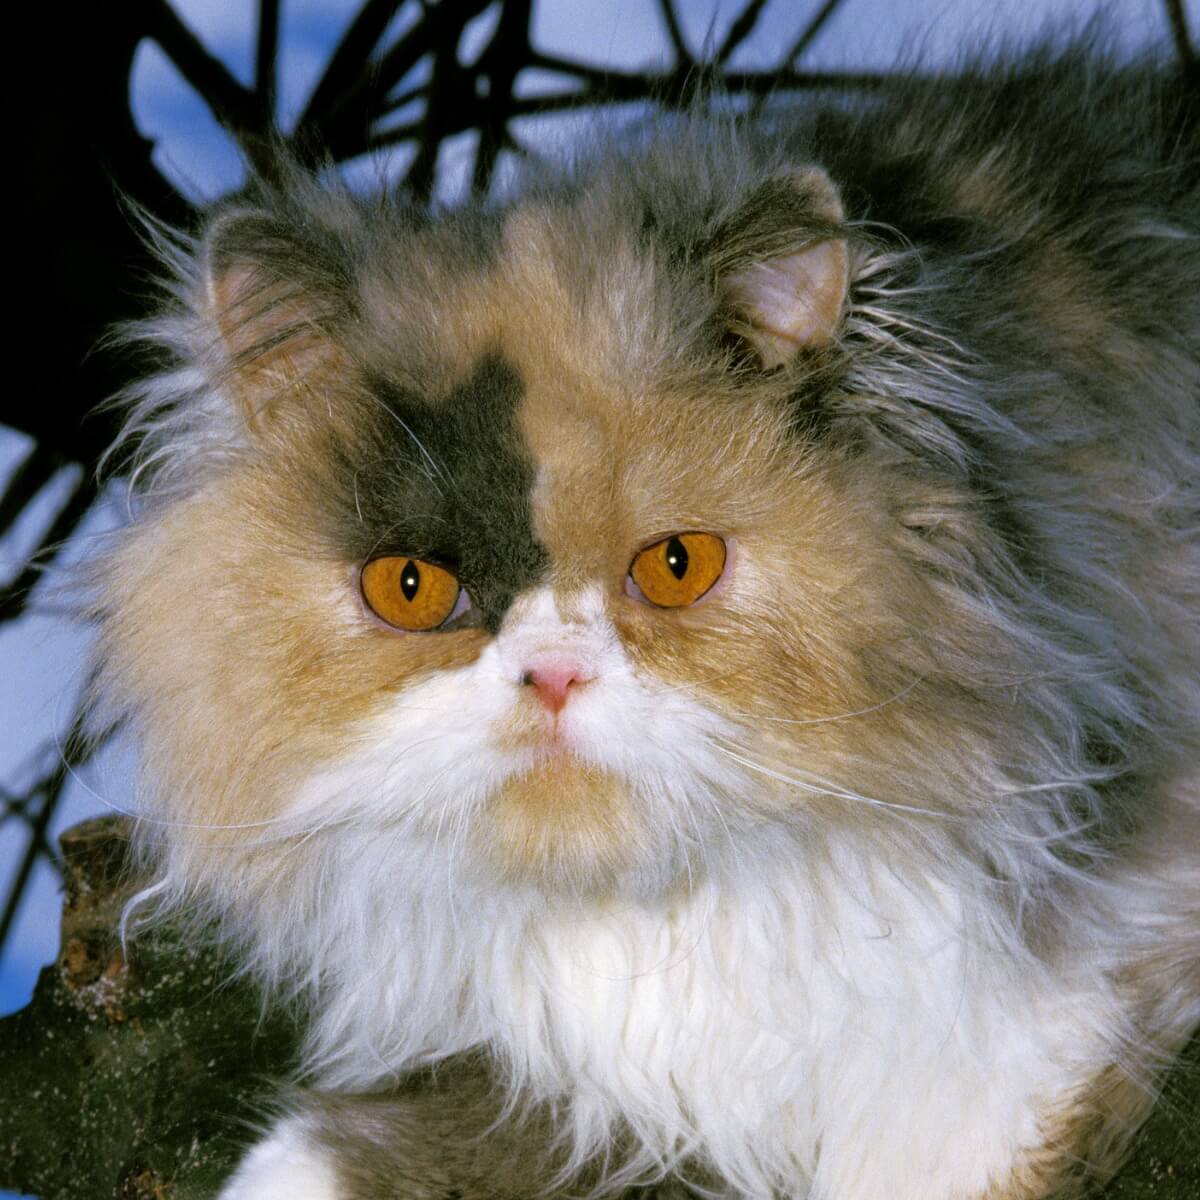 Another type of Persian cat.